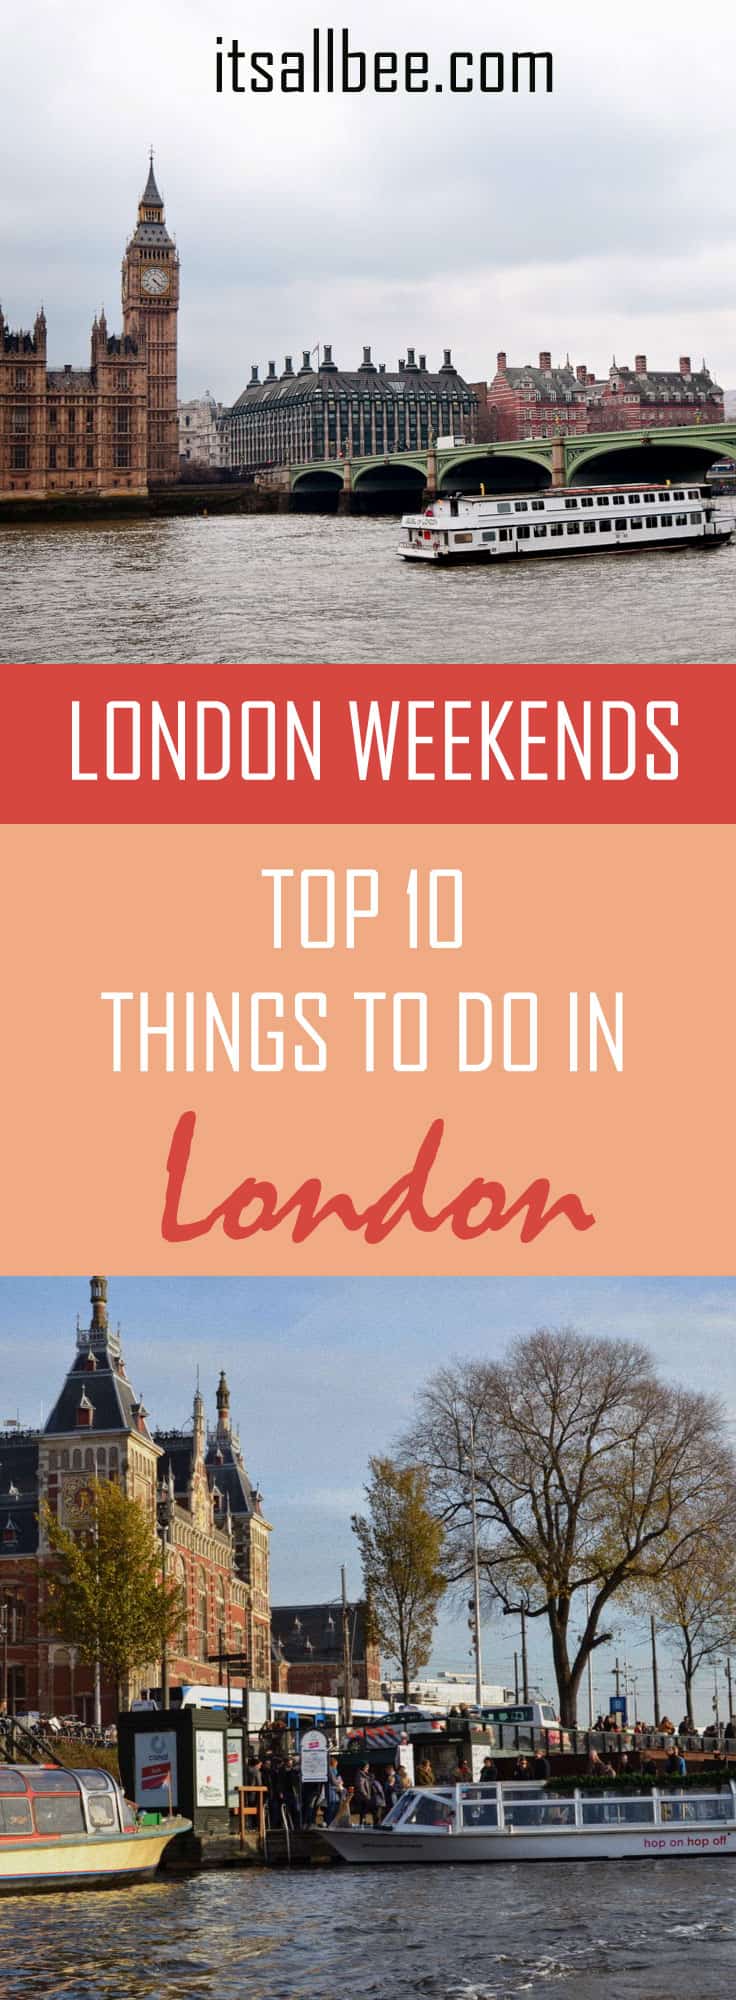 Top 10 Things To Do In London #itsallbee #traveltips #bigben #thames #touristsights